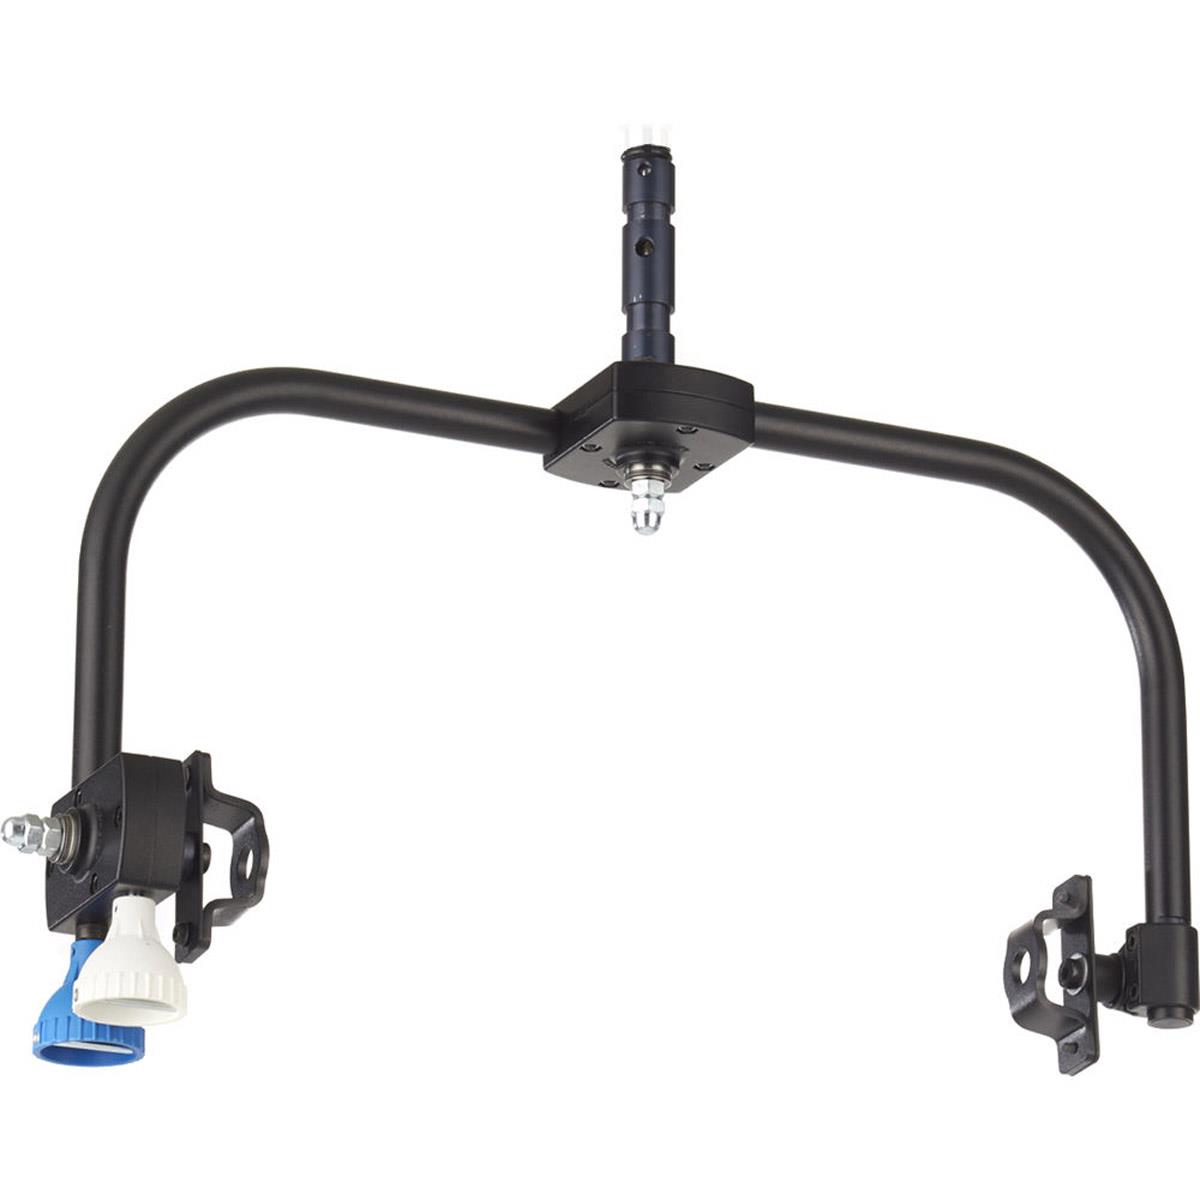 

Litepanels Pole Operated Yoke for Hilio D12 and T12 LED Lights